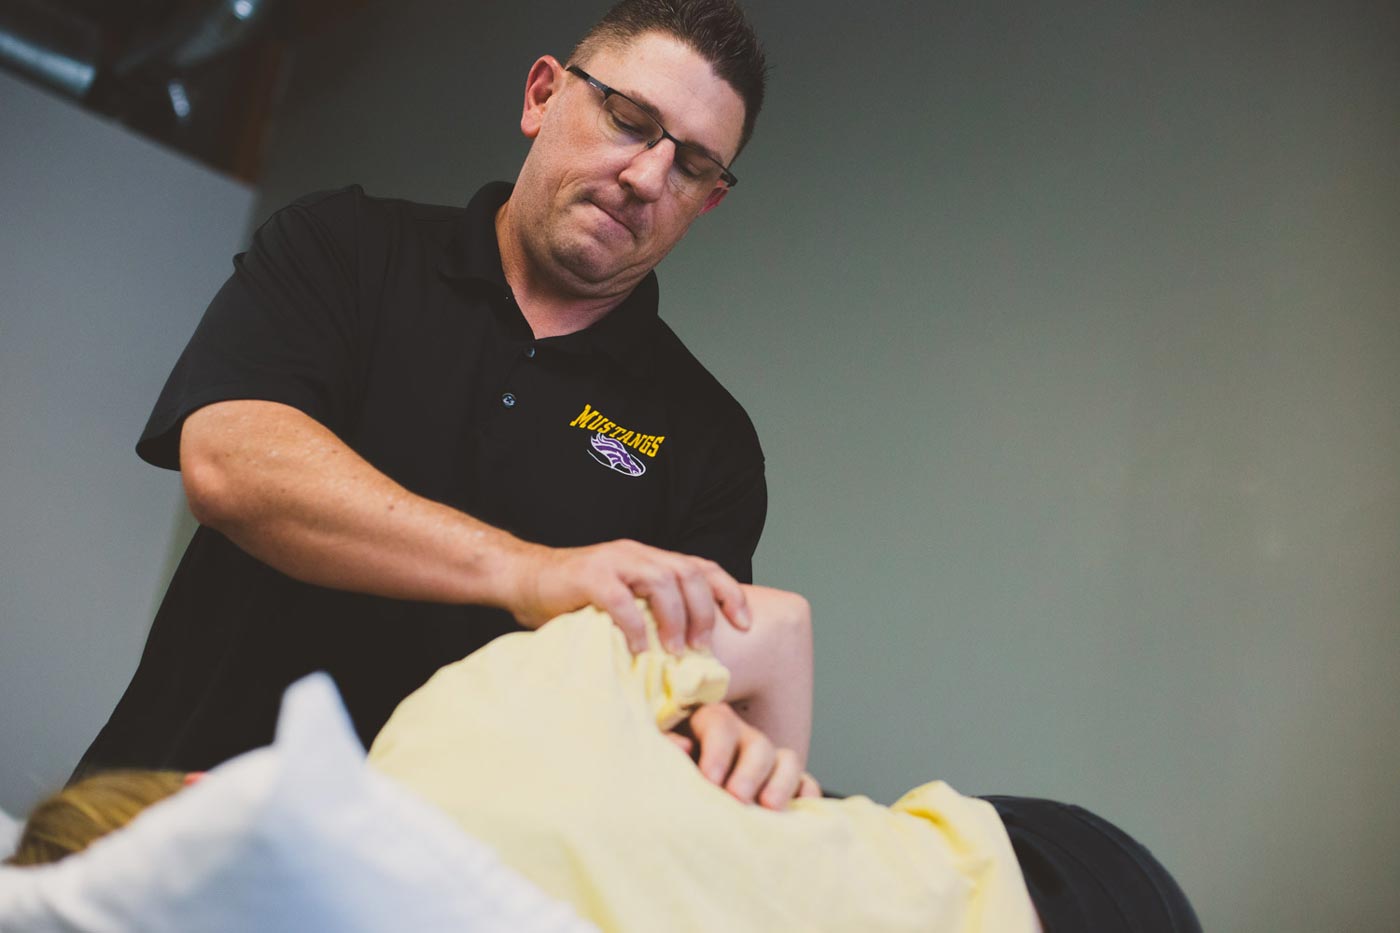 mark jagodzinski knows the entire body for physical therapy marketing strategy in surprise az